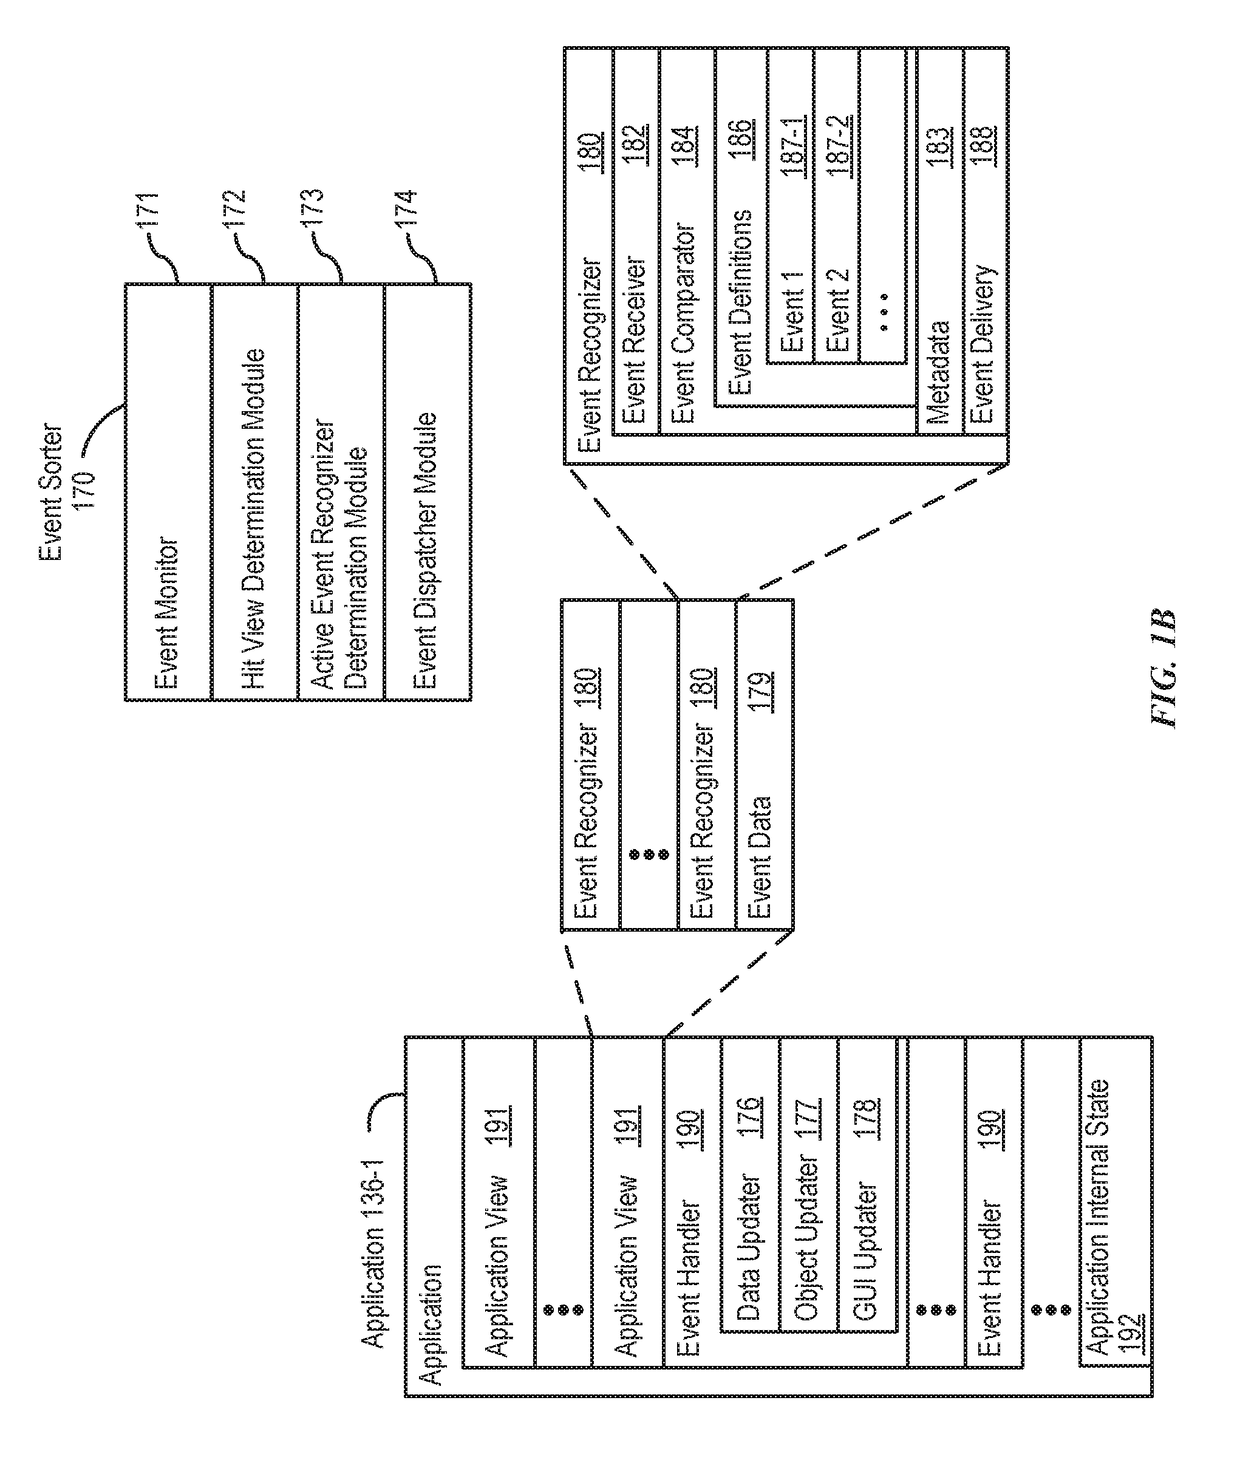 User interface for a device requesting remote authorization